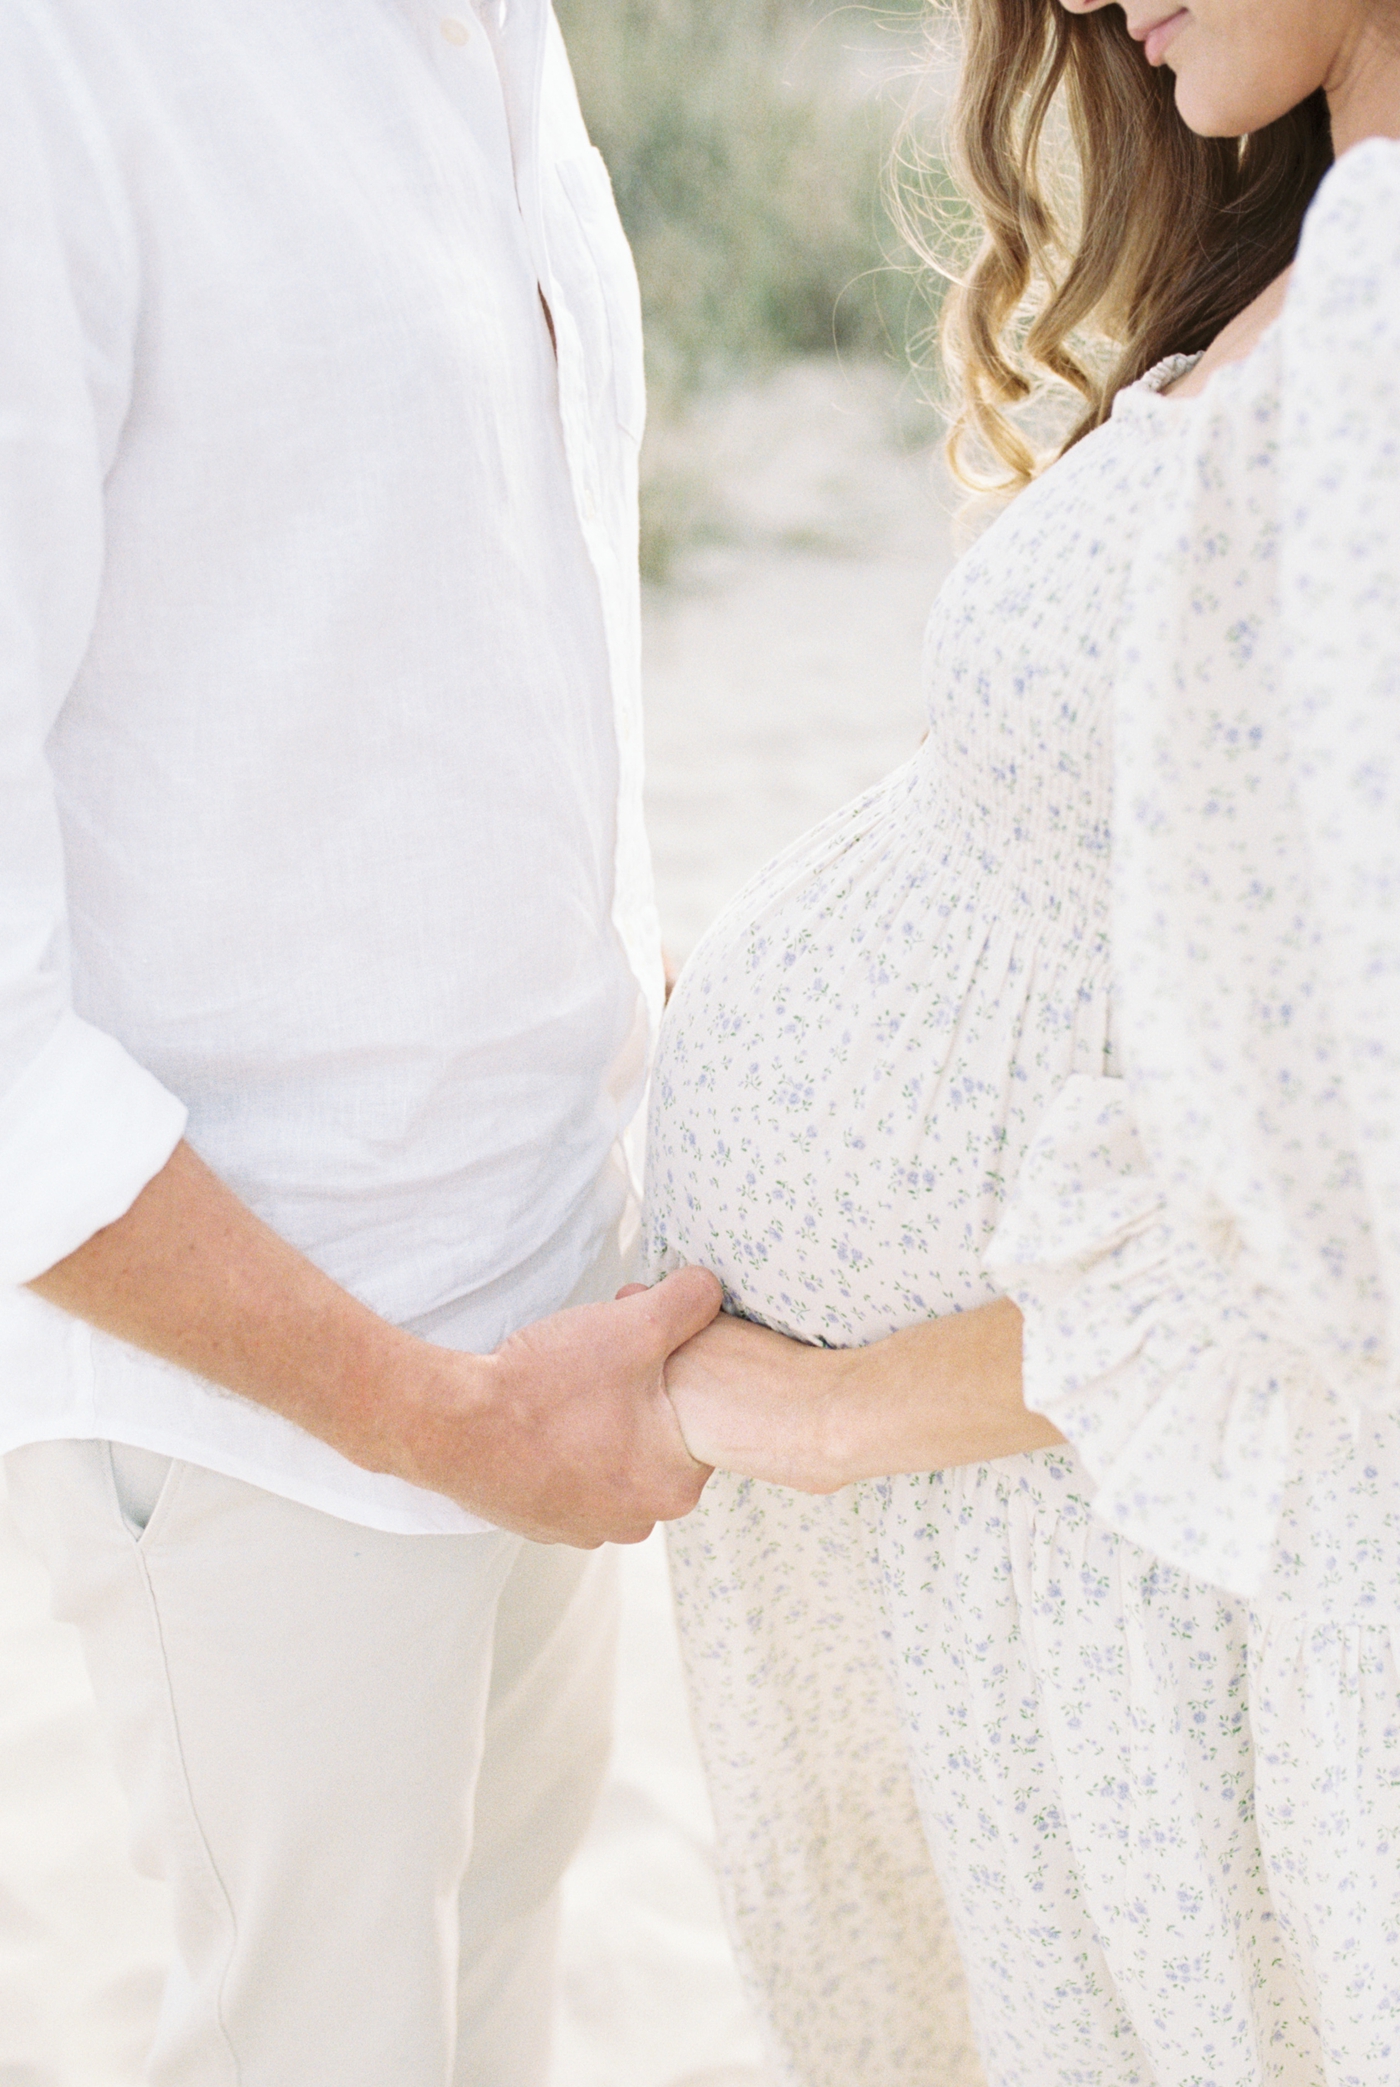 Maternity Session on the beach | Photo by Caitlyn Motycka Photography.